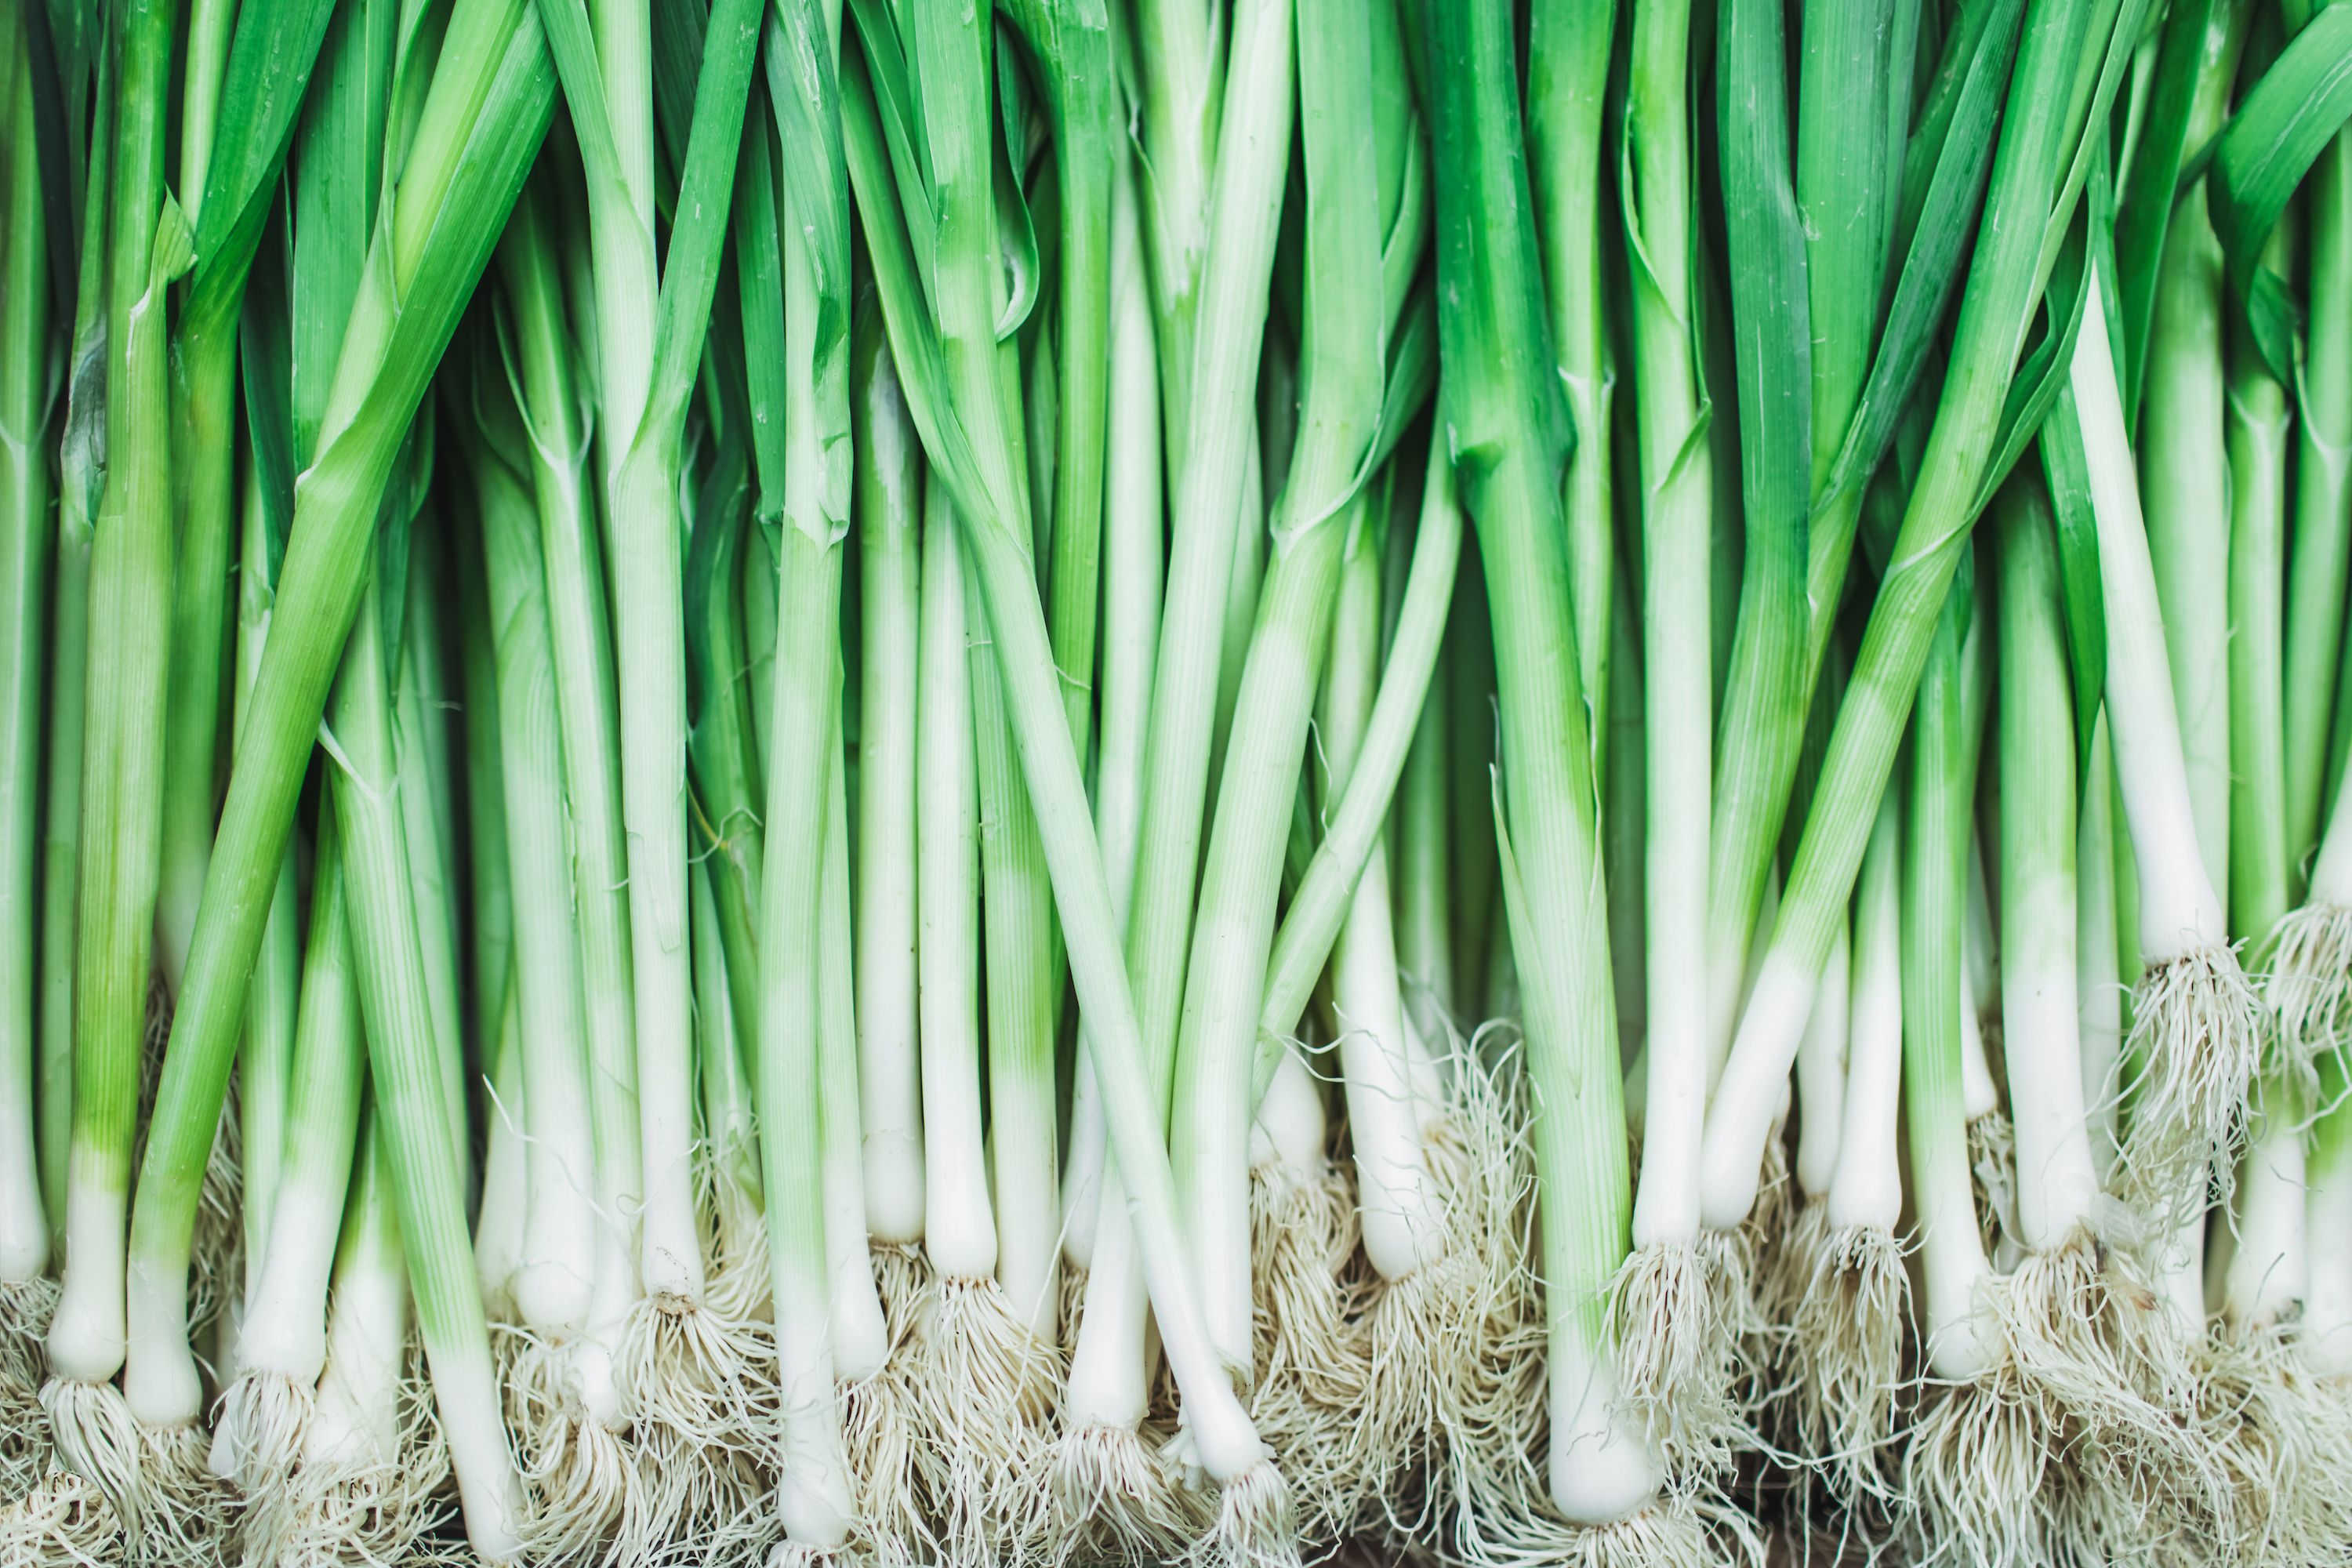 Scallions vs. Green Onions: Are They the Same Thing?